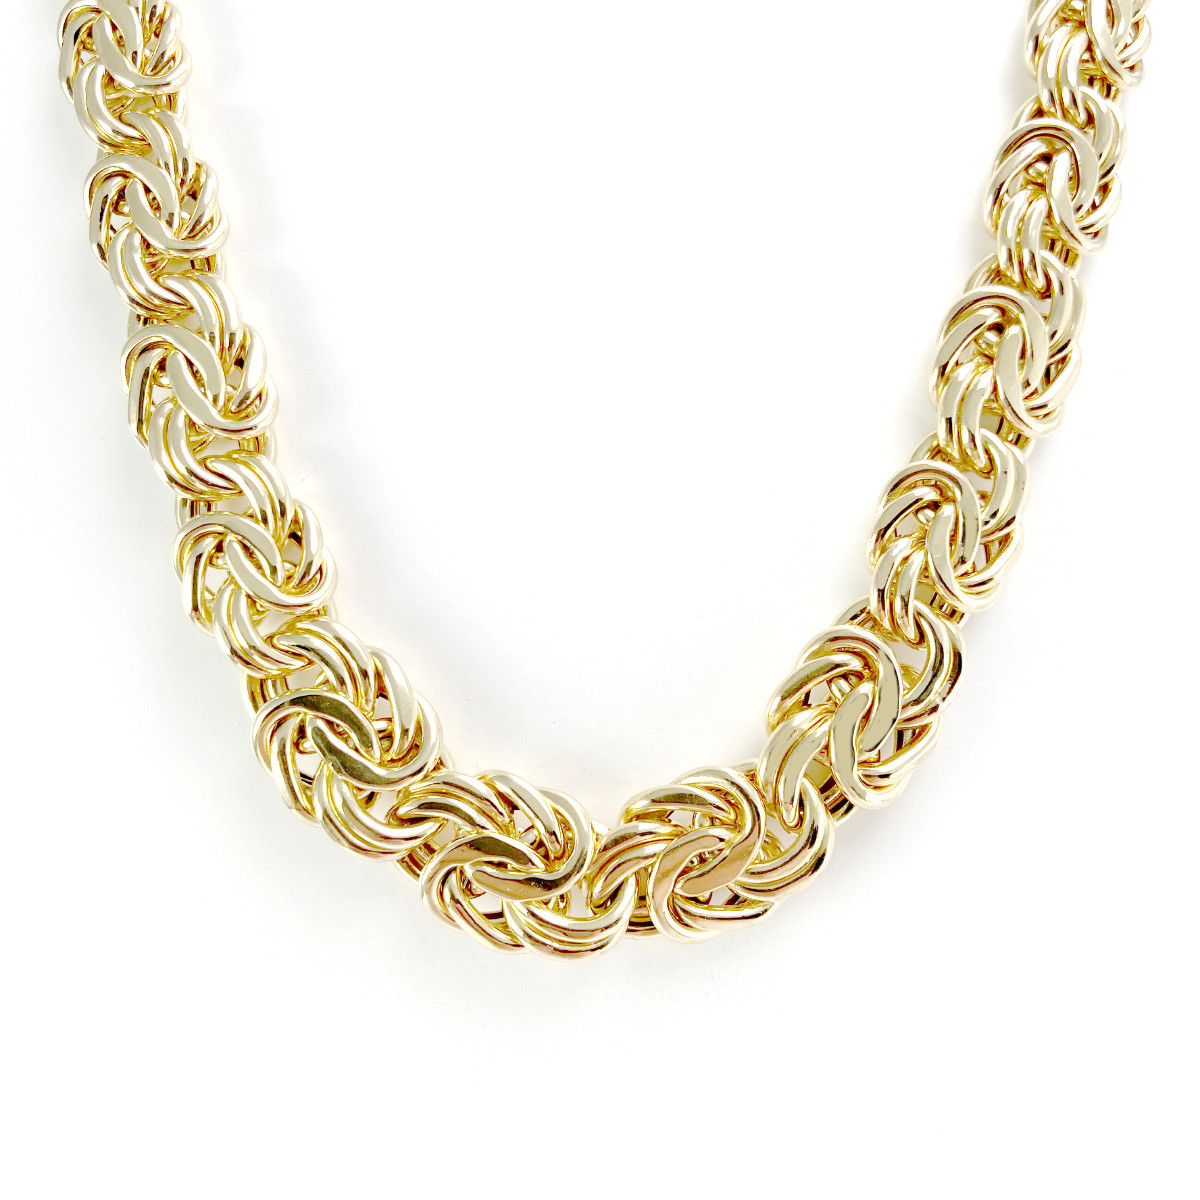 Collier d'occasion or 750 jaune maille royale 41 cm